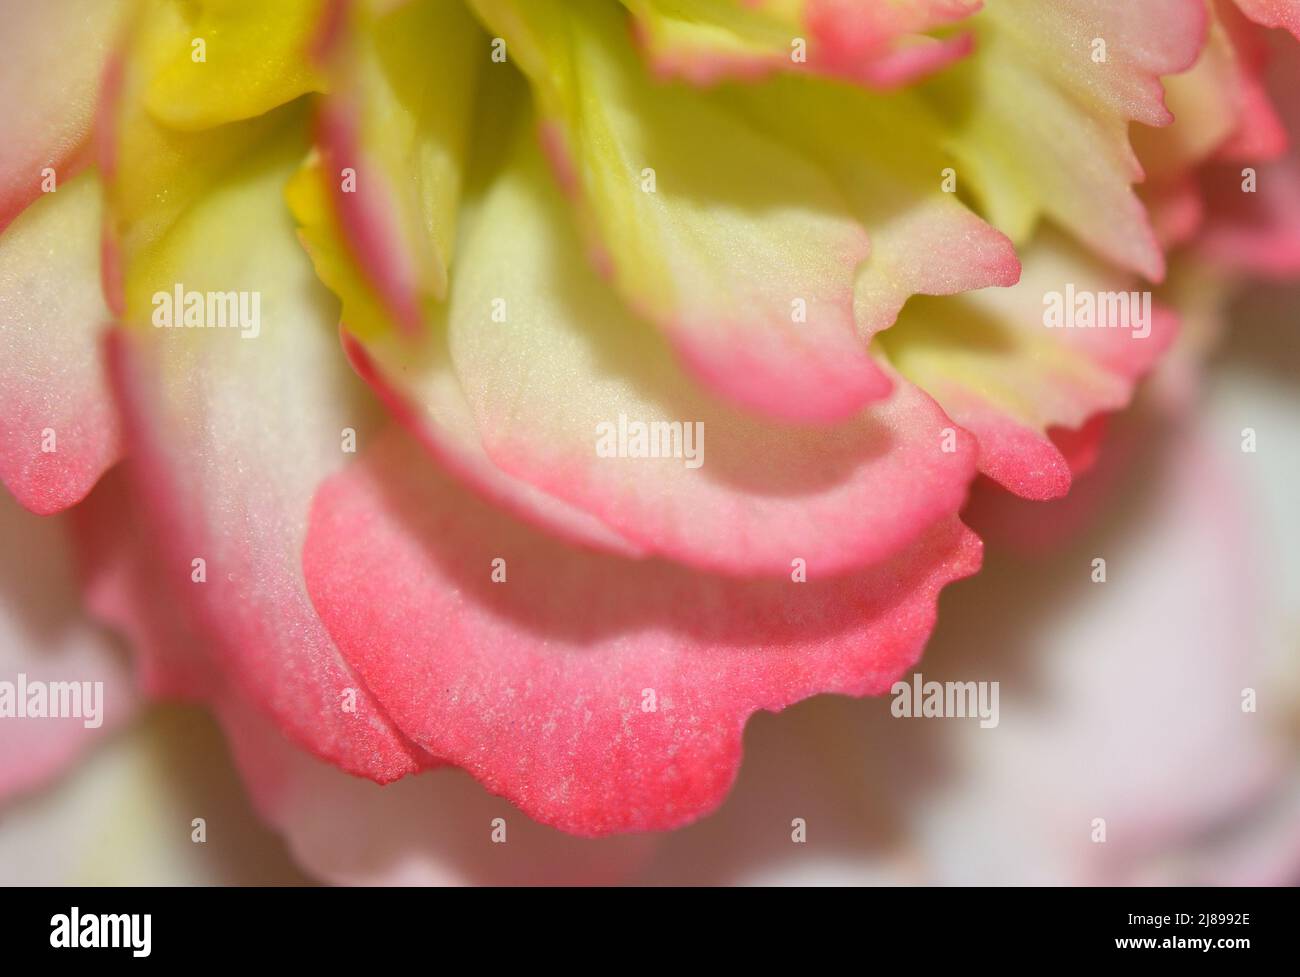 Closeup of Rose Picotee Begonia flower showing yellow stamens and pink fringed petals. Stock Photo